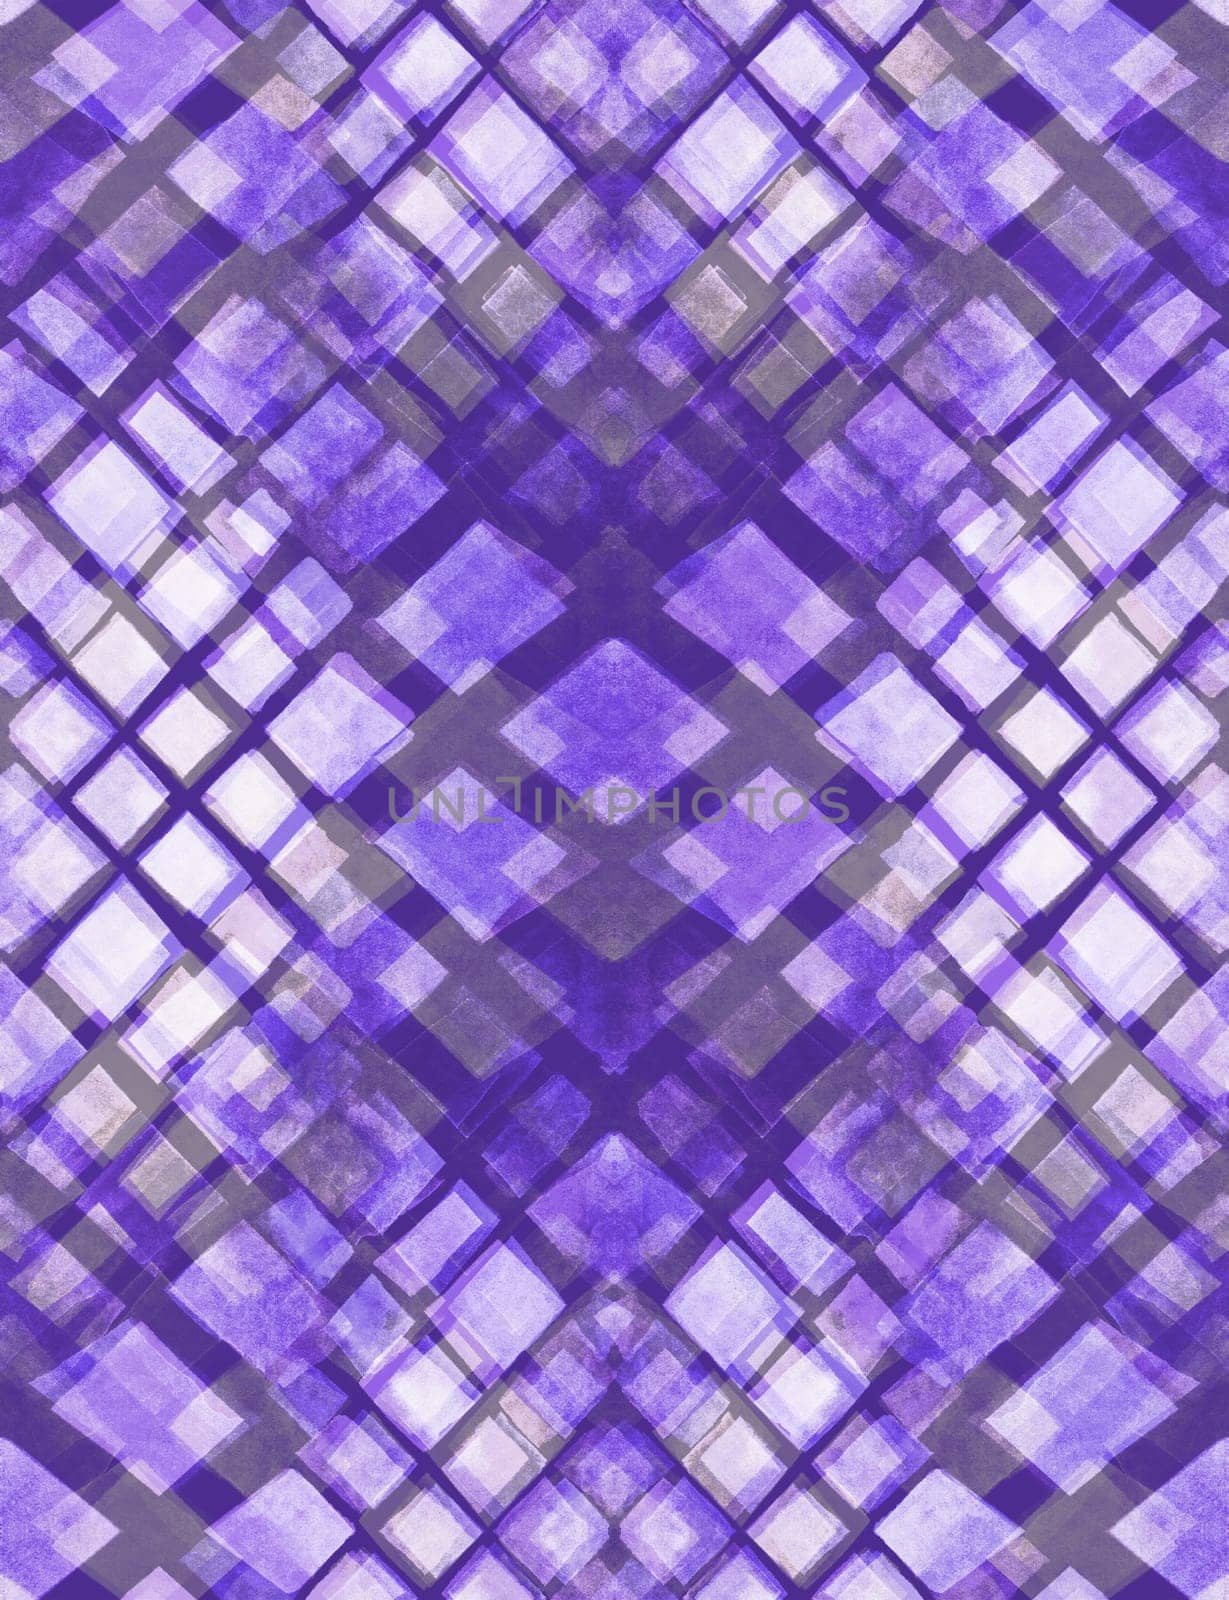 Purple geometric abstract watercolor pattern with rhombuses by hand on gray background by MarinaVoyush